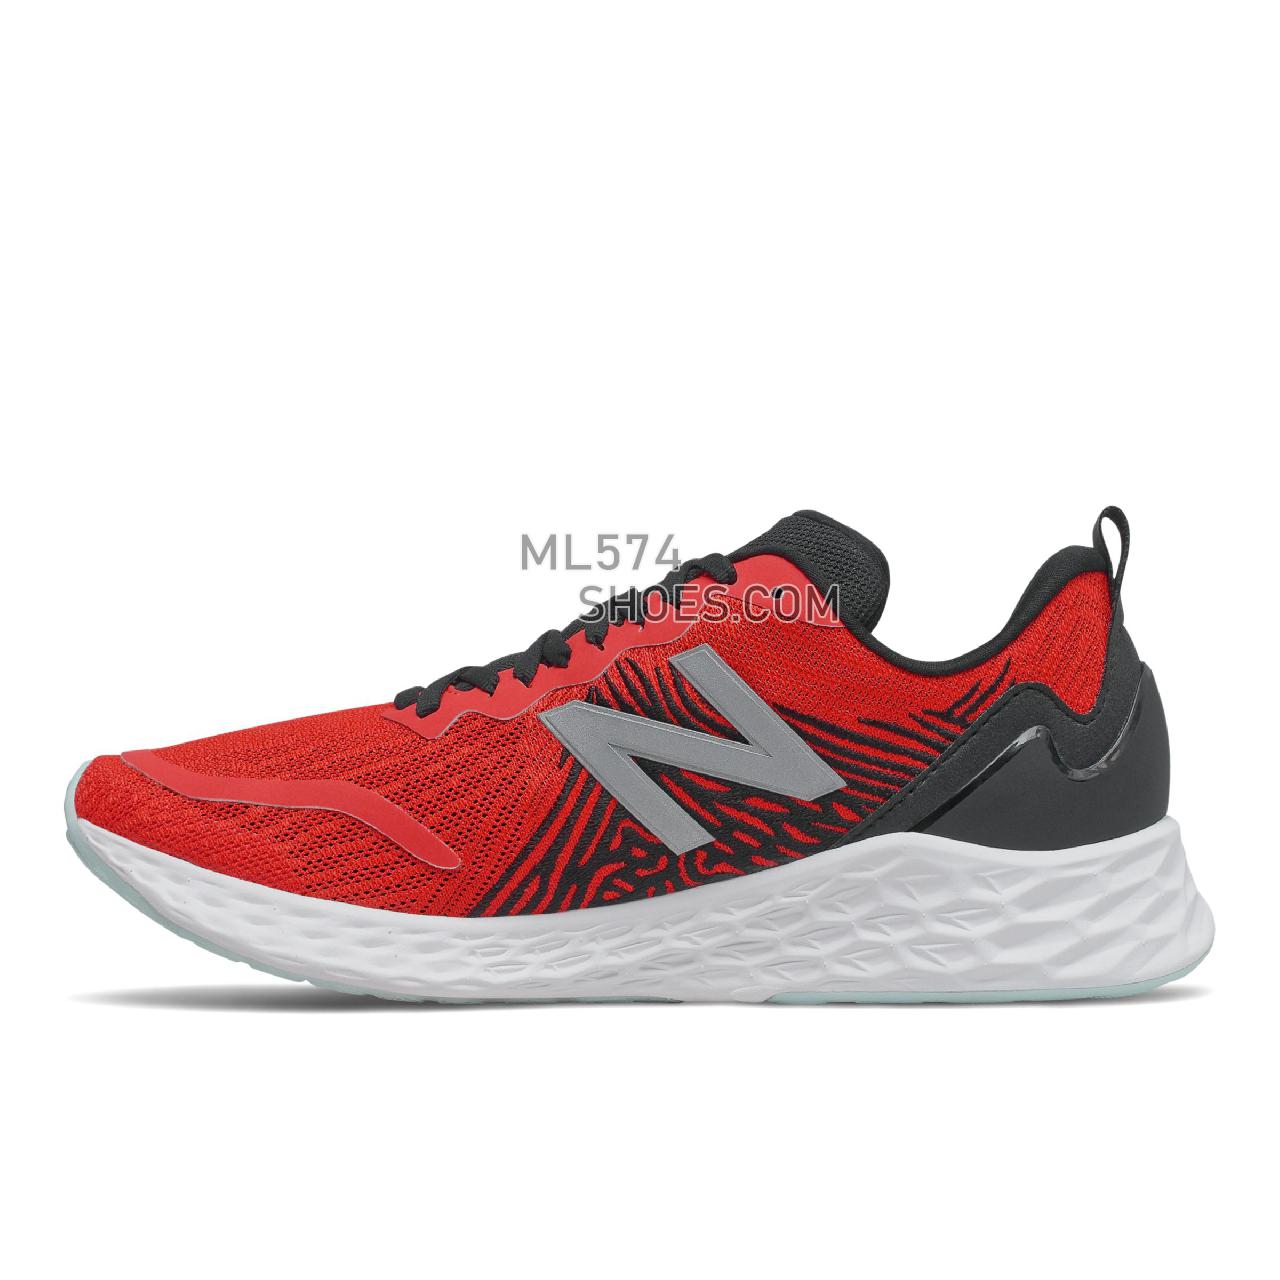 New Balance Fresh Foam Tempo - Men's Neutral Running - Velocity Red with Black - MTMPOCR